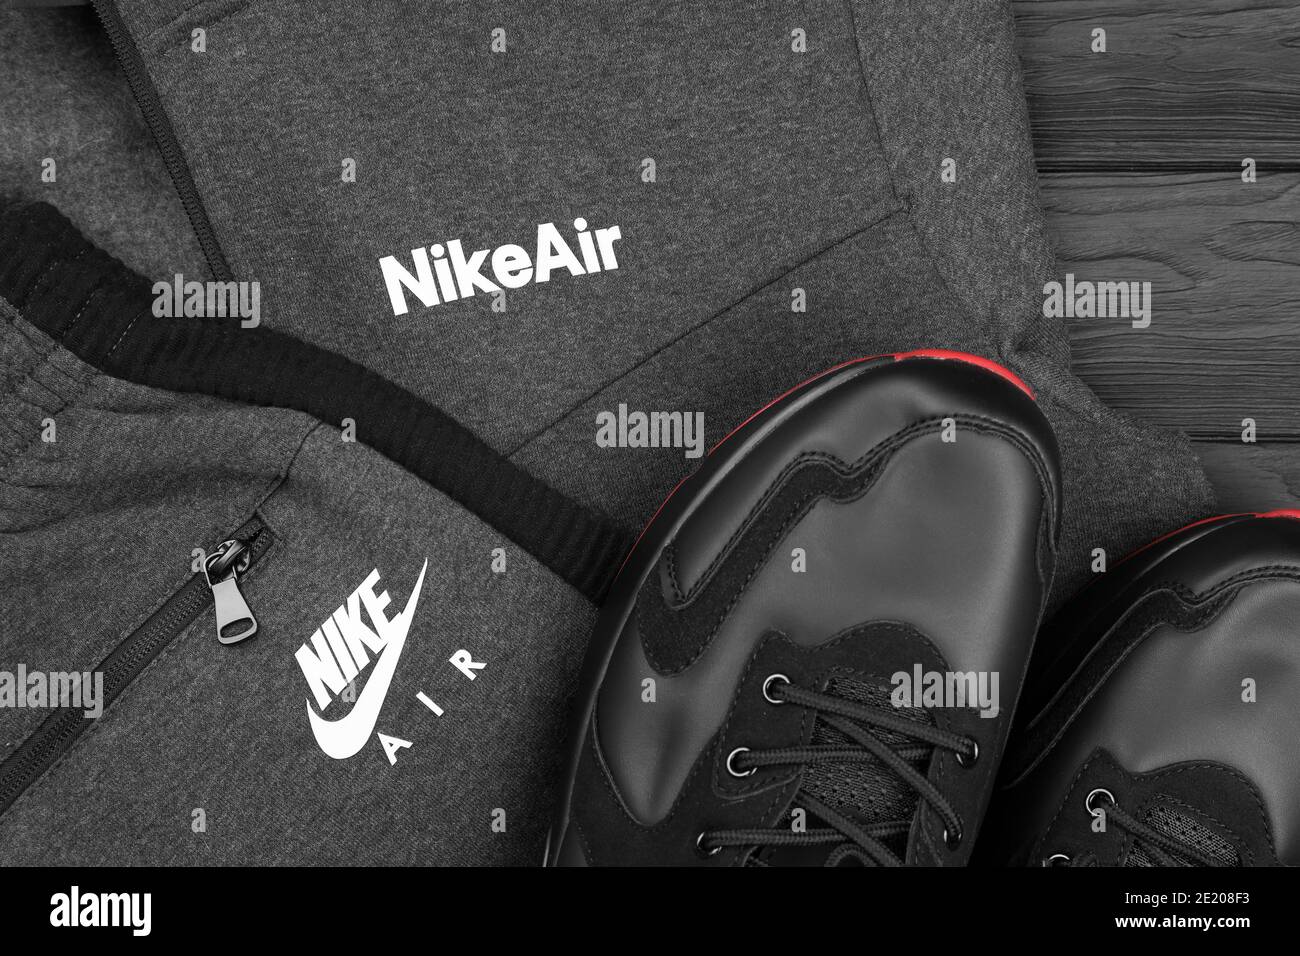 Nike Black Jacket High Resolution Stock Photography and Images - Alamy